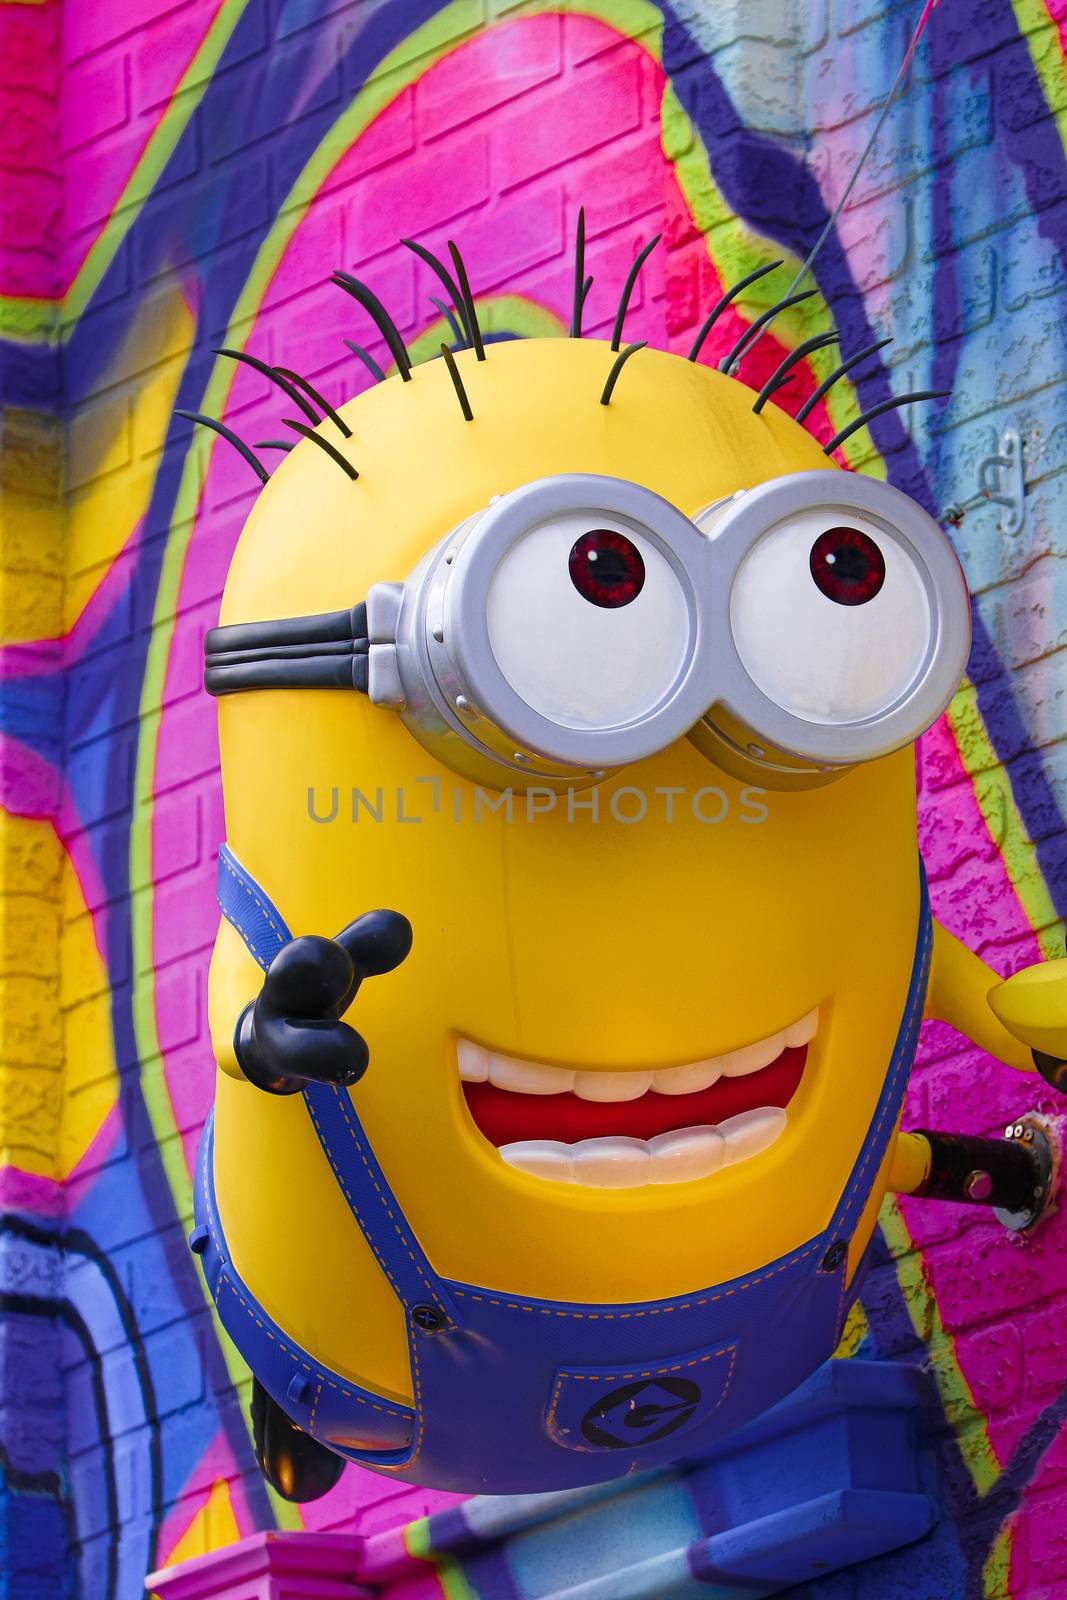 Statue of "HAPPY MINION", located in Universal Studios Japan by USA-TARO